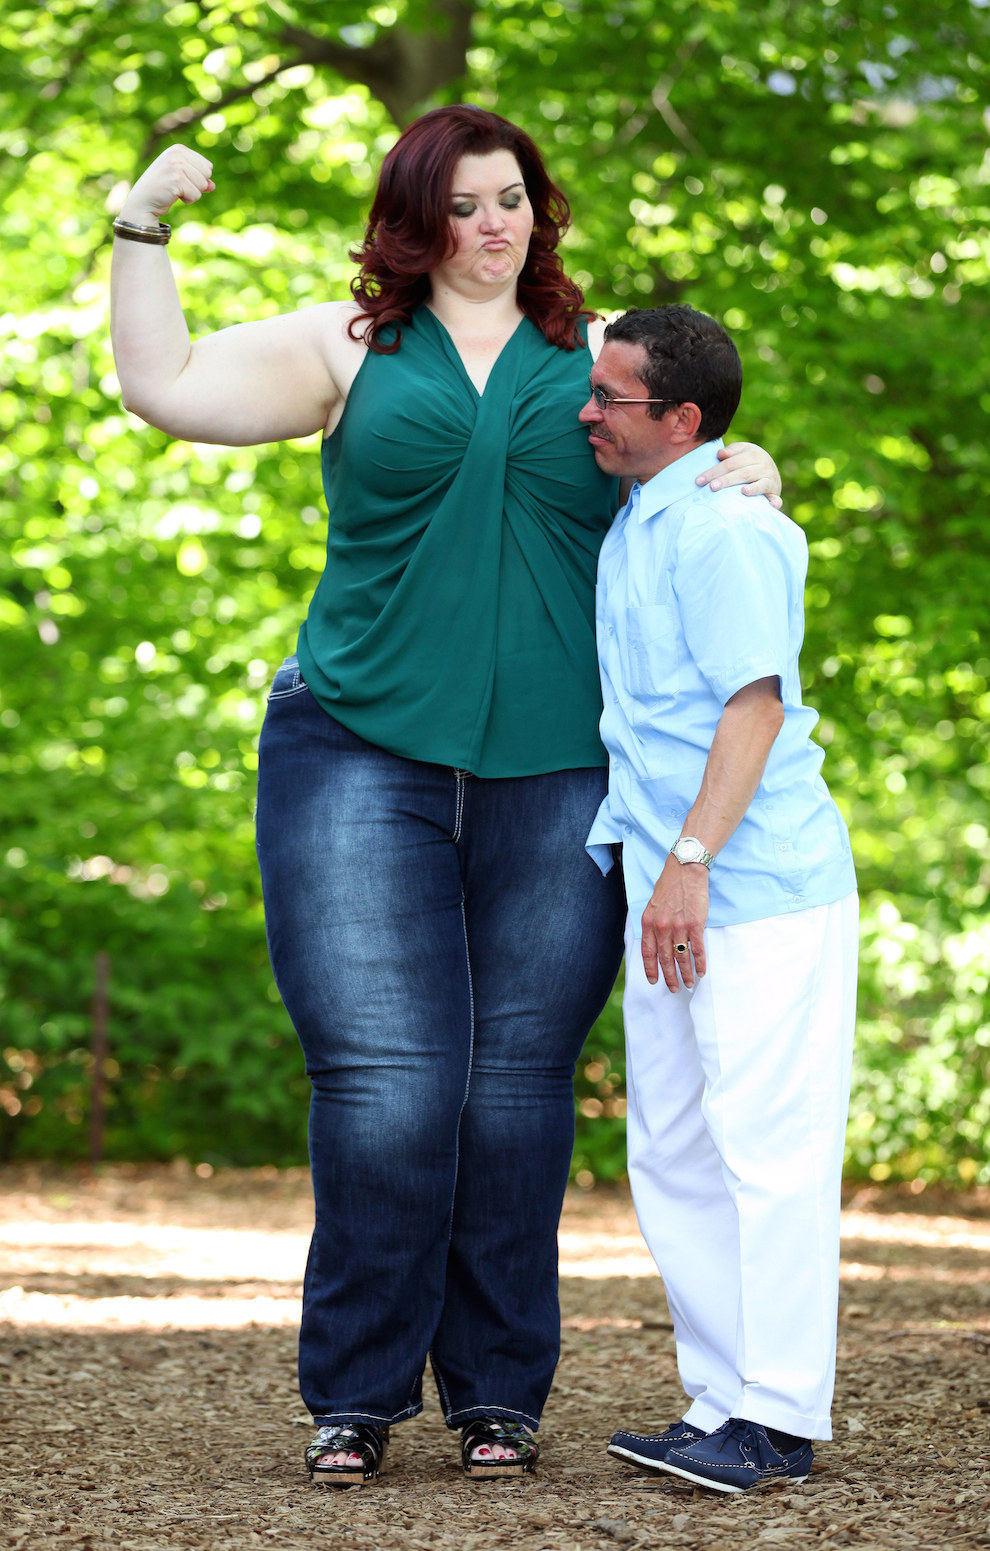 this-woman-is-6-foot-3-inches-tall-weighs-20-stone-and-gets-paid-by